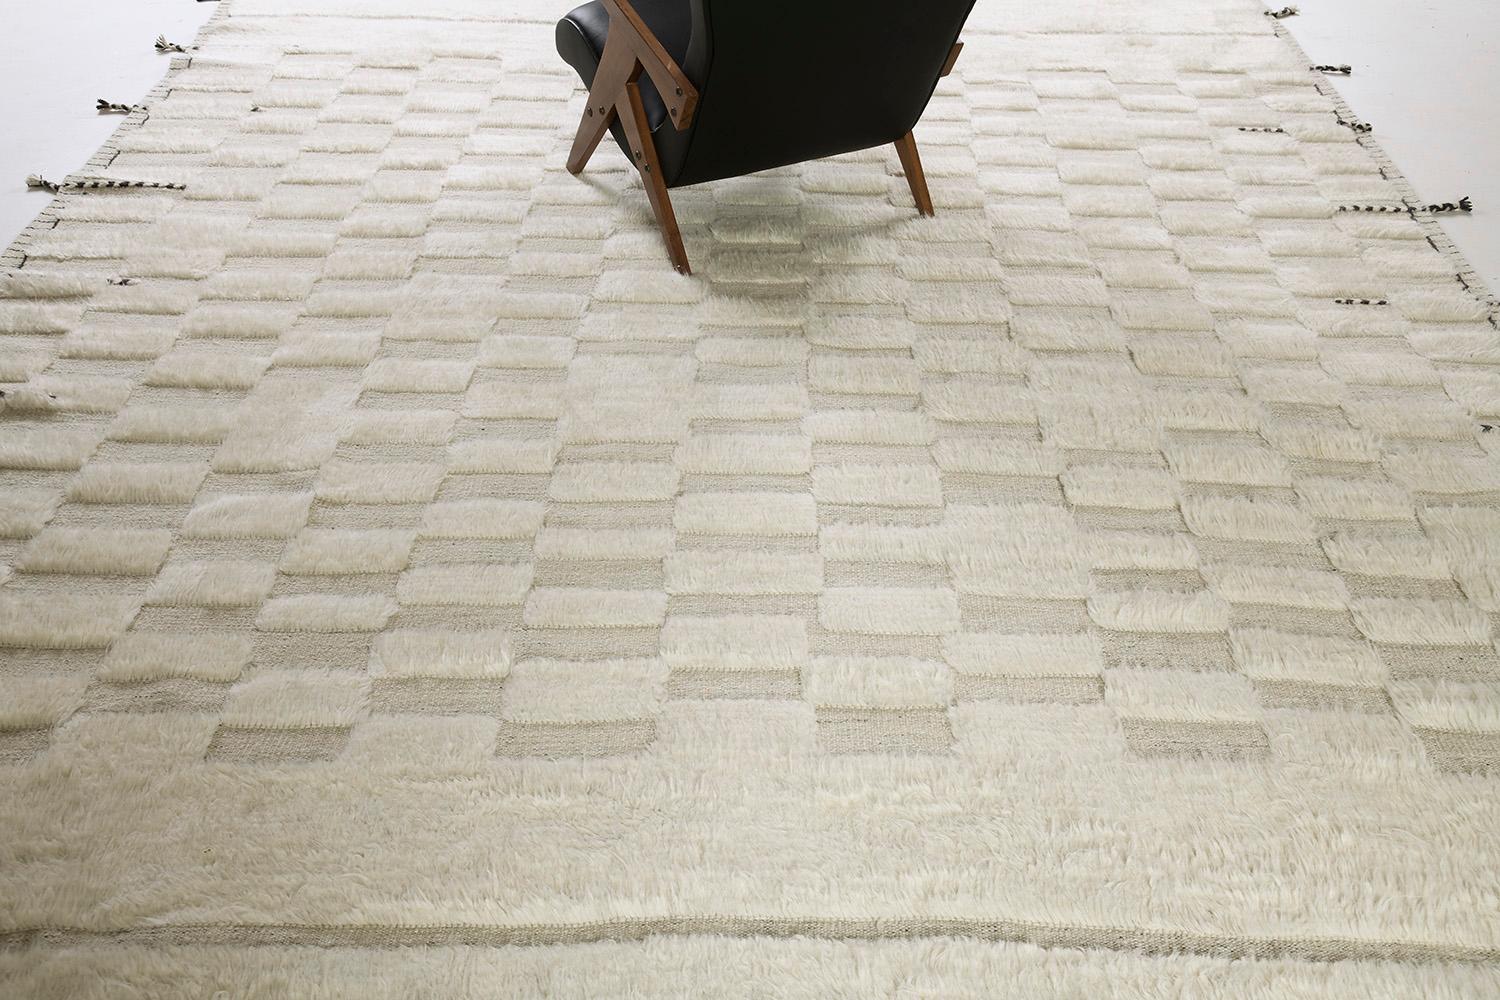 Sirocco is a stunning handwoven ivory rug with embossed detailing in a checkered pattern atop a natural gray pile weave. Beautiful tassels and bordered designs add time and one-of-a-kind essence for the modern design world. Haute Bohemian